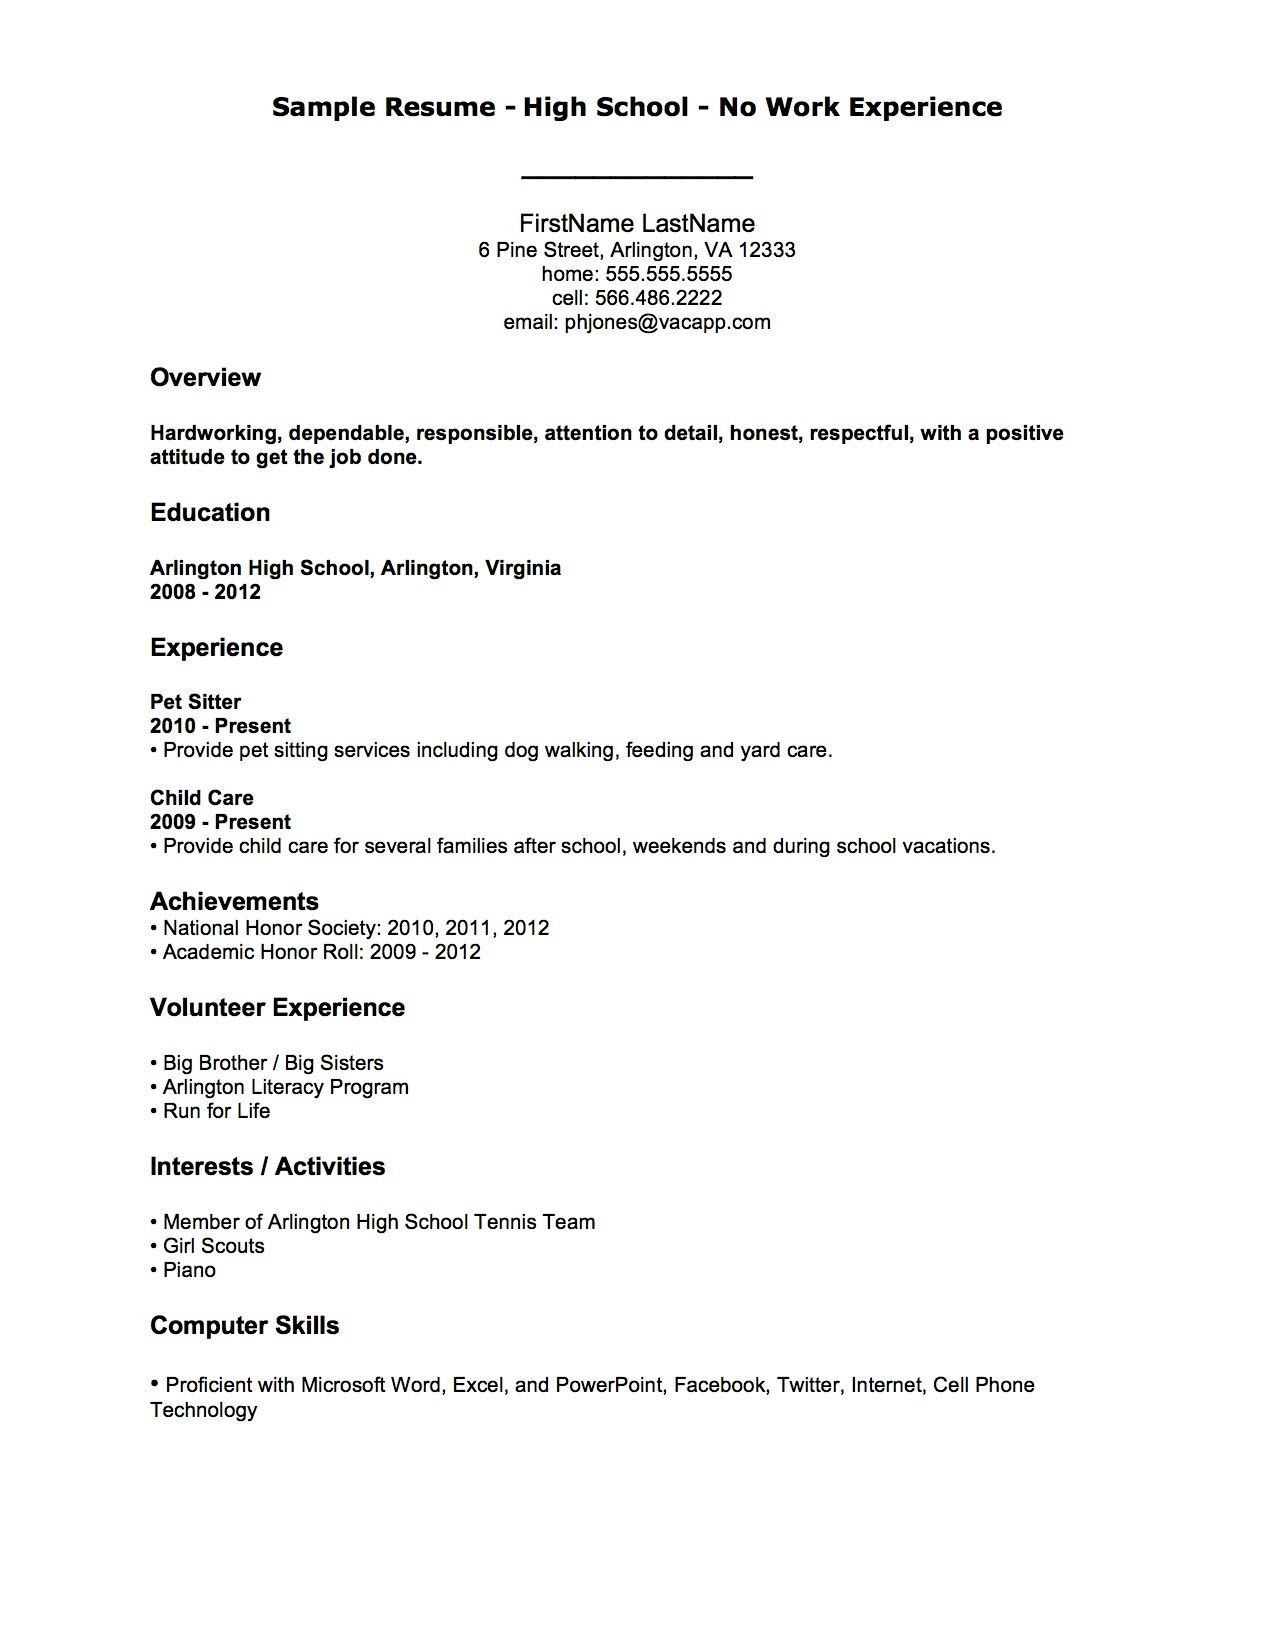 High School Student Resume with No Work Experience Template Free Resume Examples with No Job Experience , #examples #experience …